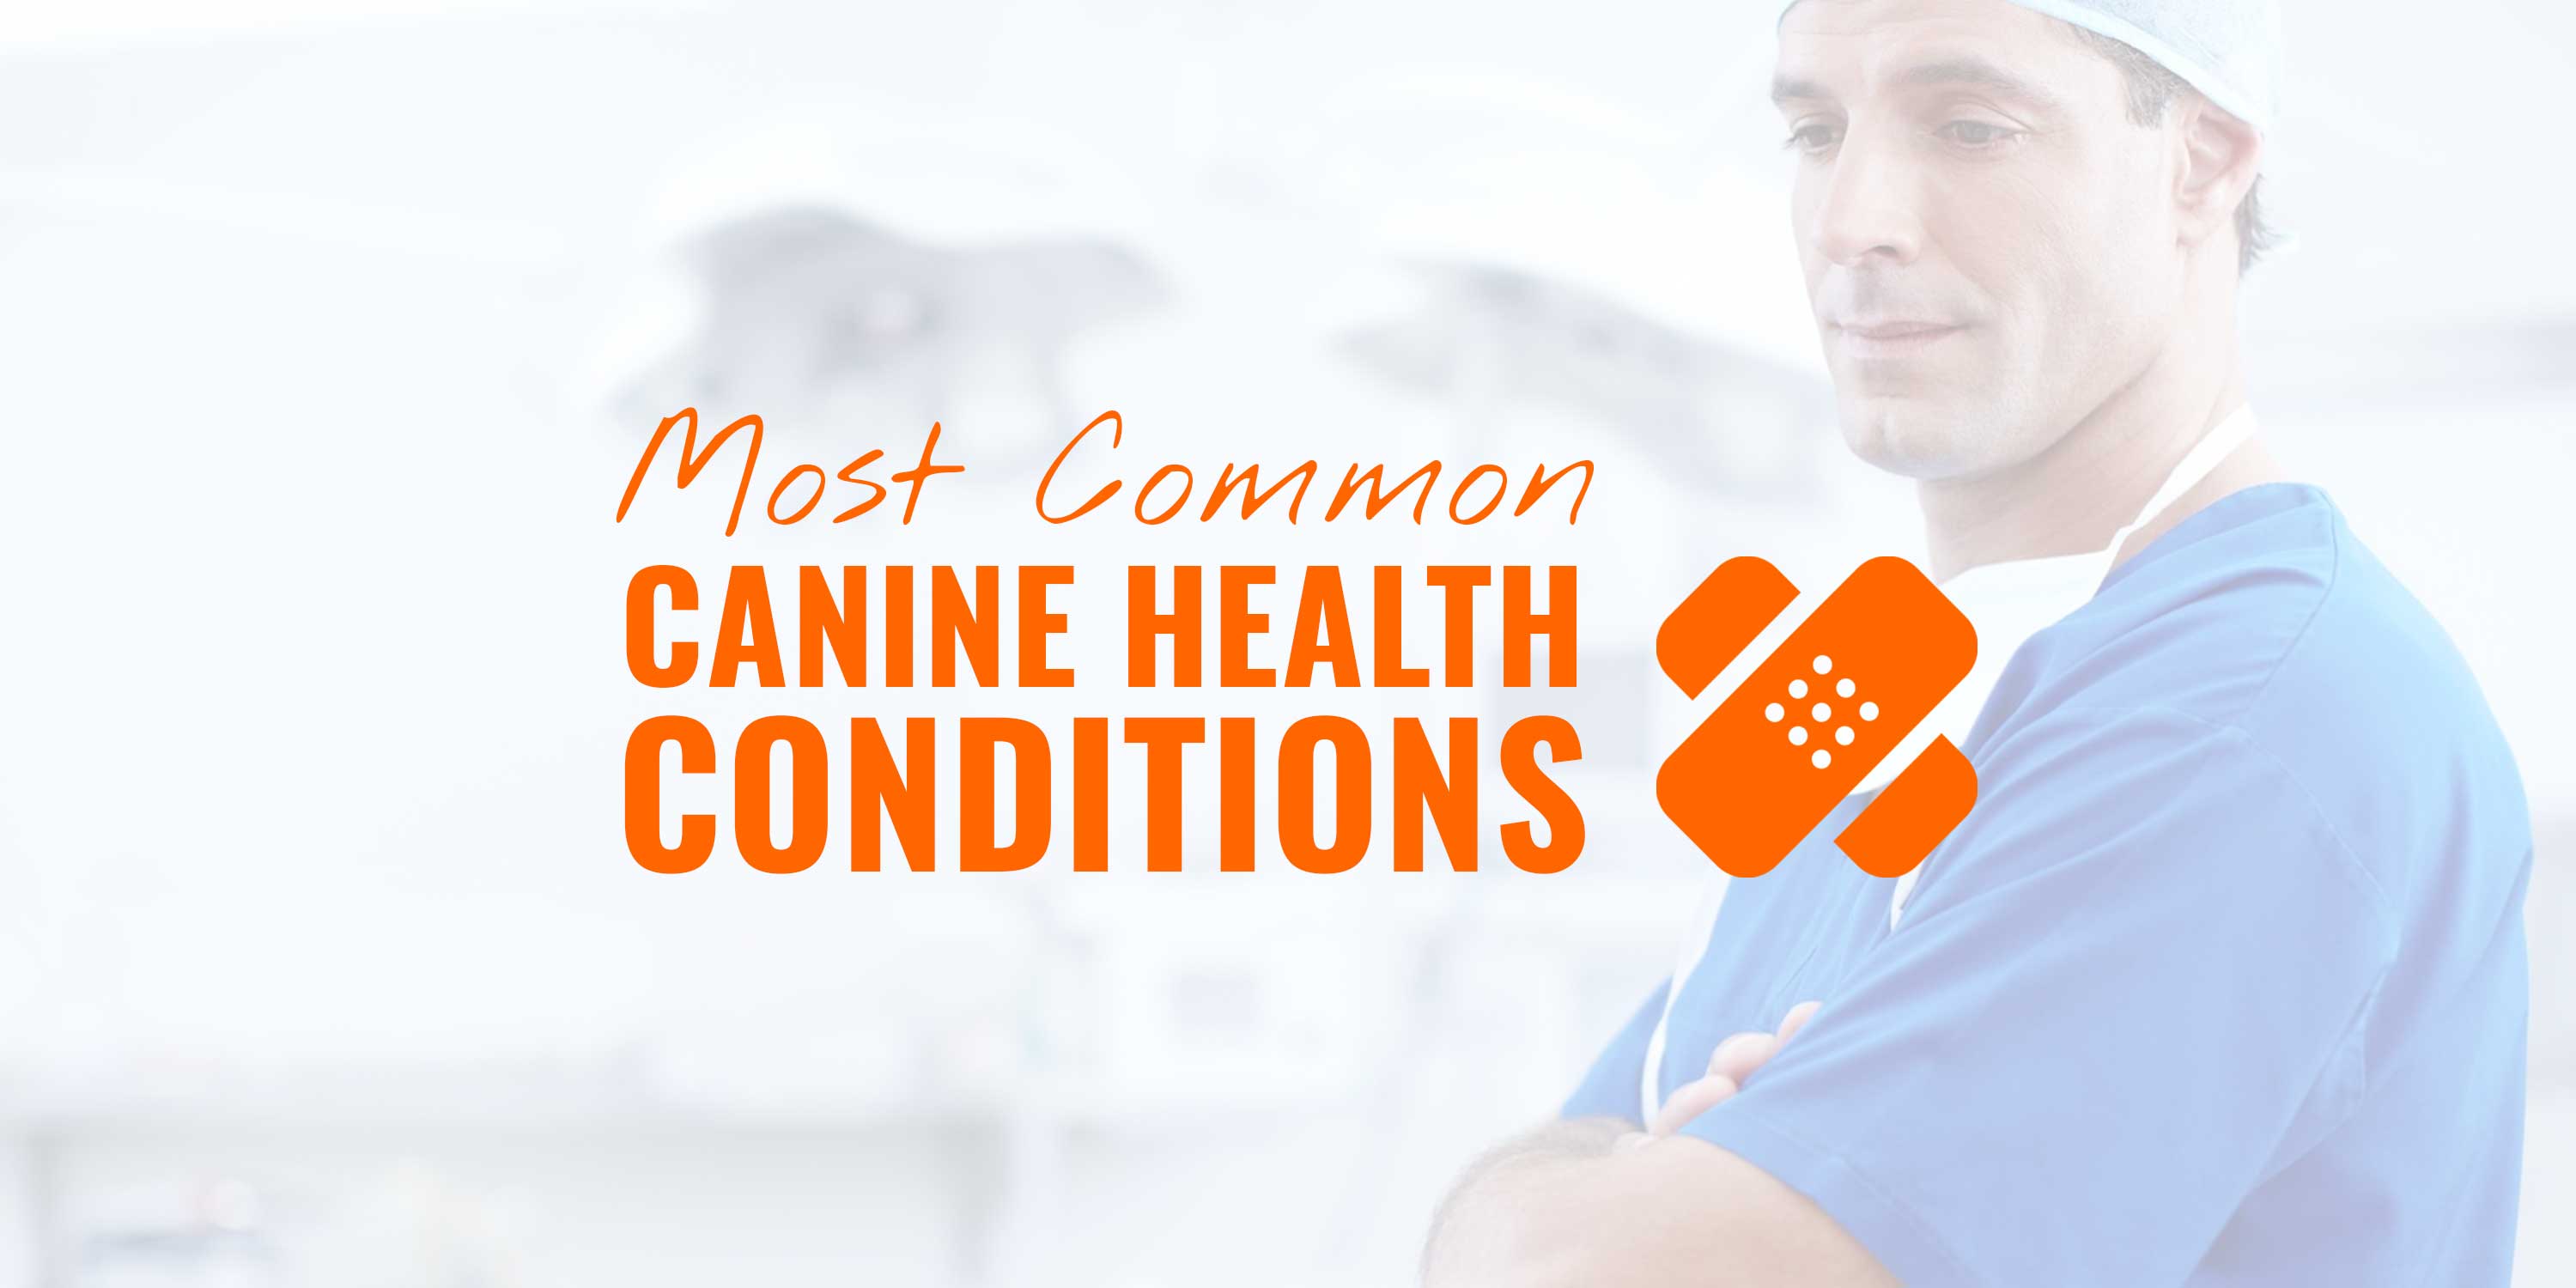 common canine health conditions